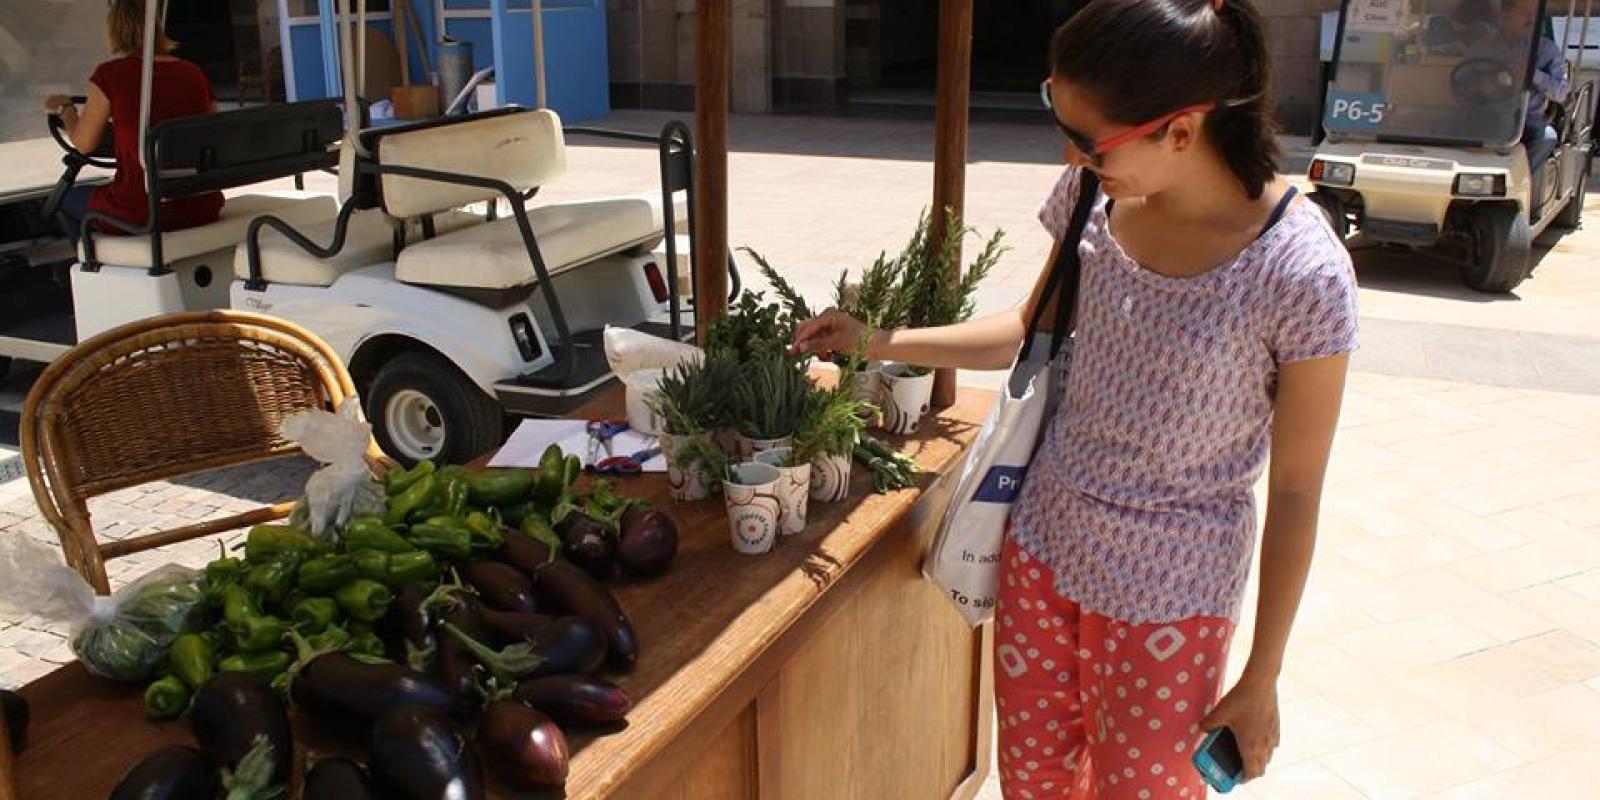 AUC's Sustainable Campus Day and Farmer's Market invites the University and local communities to learn about green initiative